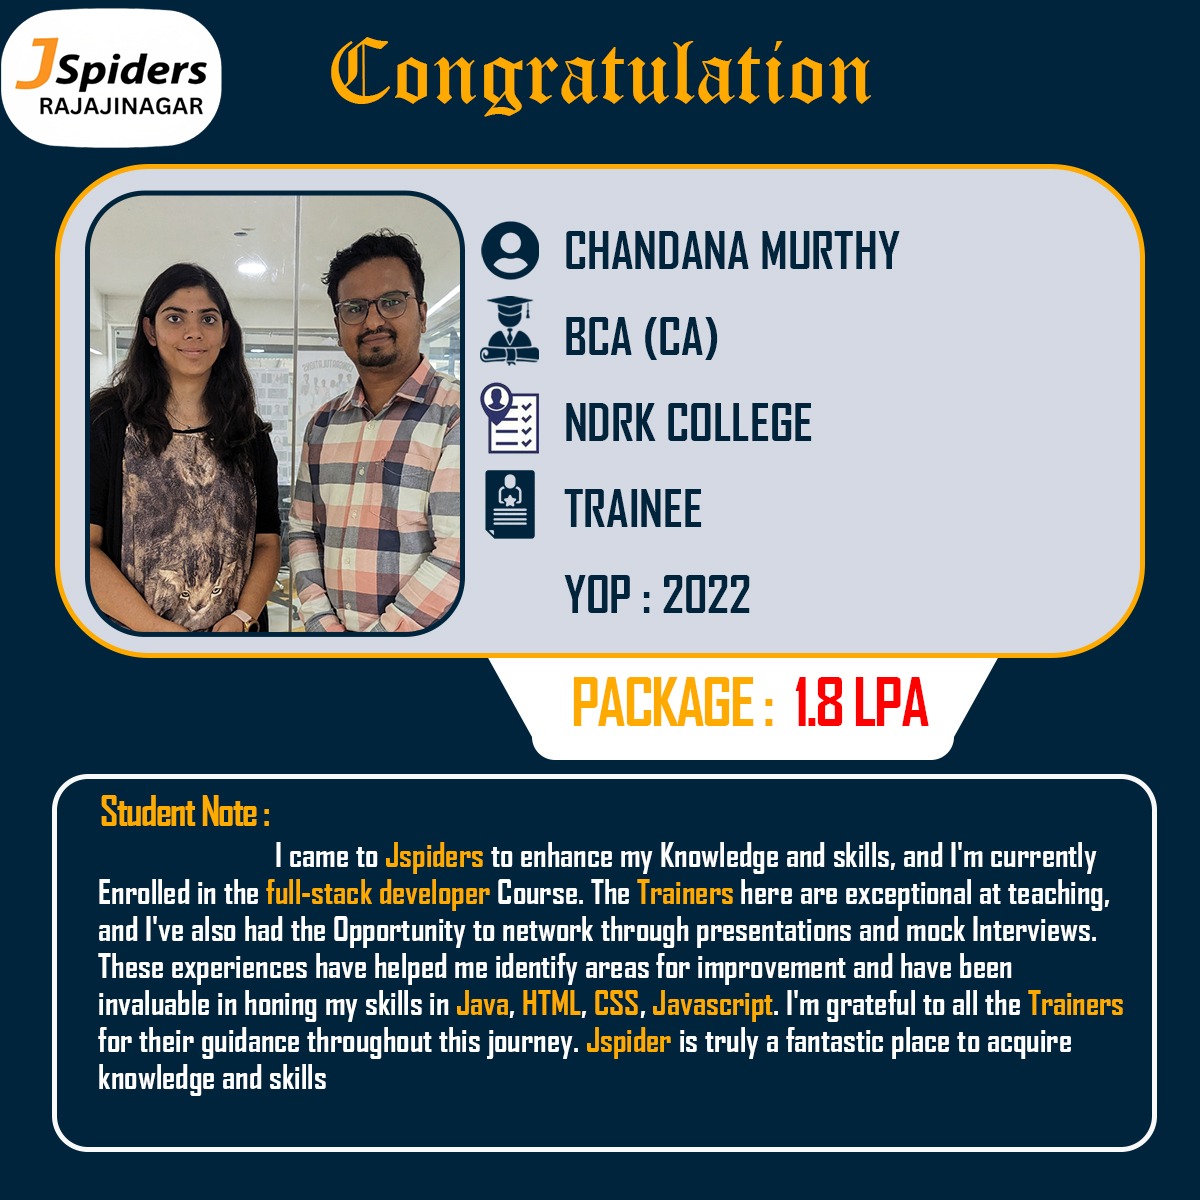 Exciting news! 'Chandana Murthy' just got placed in a dream job! 🚀 Wishing them all the success in the world! ✨ 

Qualification: BCA
Stream: CA
College: NDRK
Designation: Trainee
YOP: 2022
.
.
.
.
.
#jobplacement #careersuccess #careerwins ney ##jobplacement